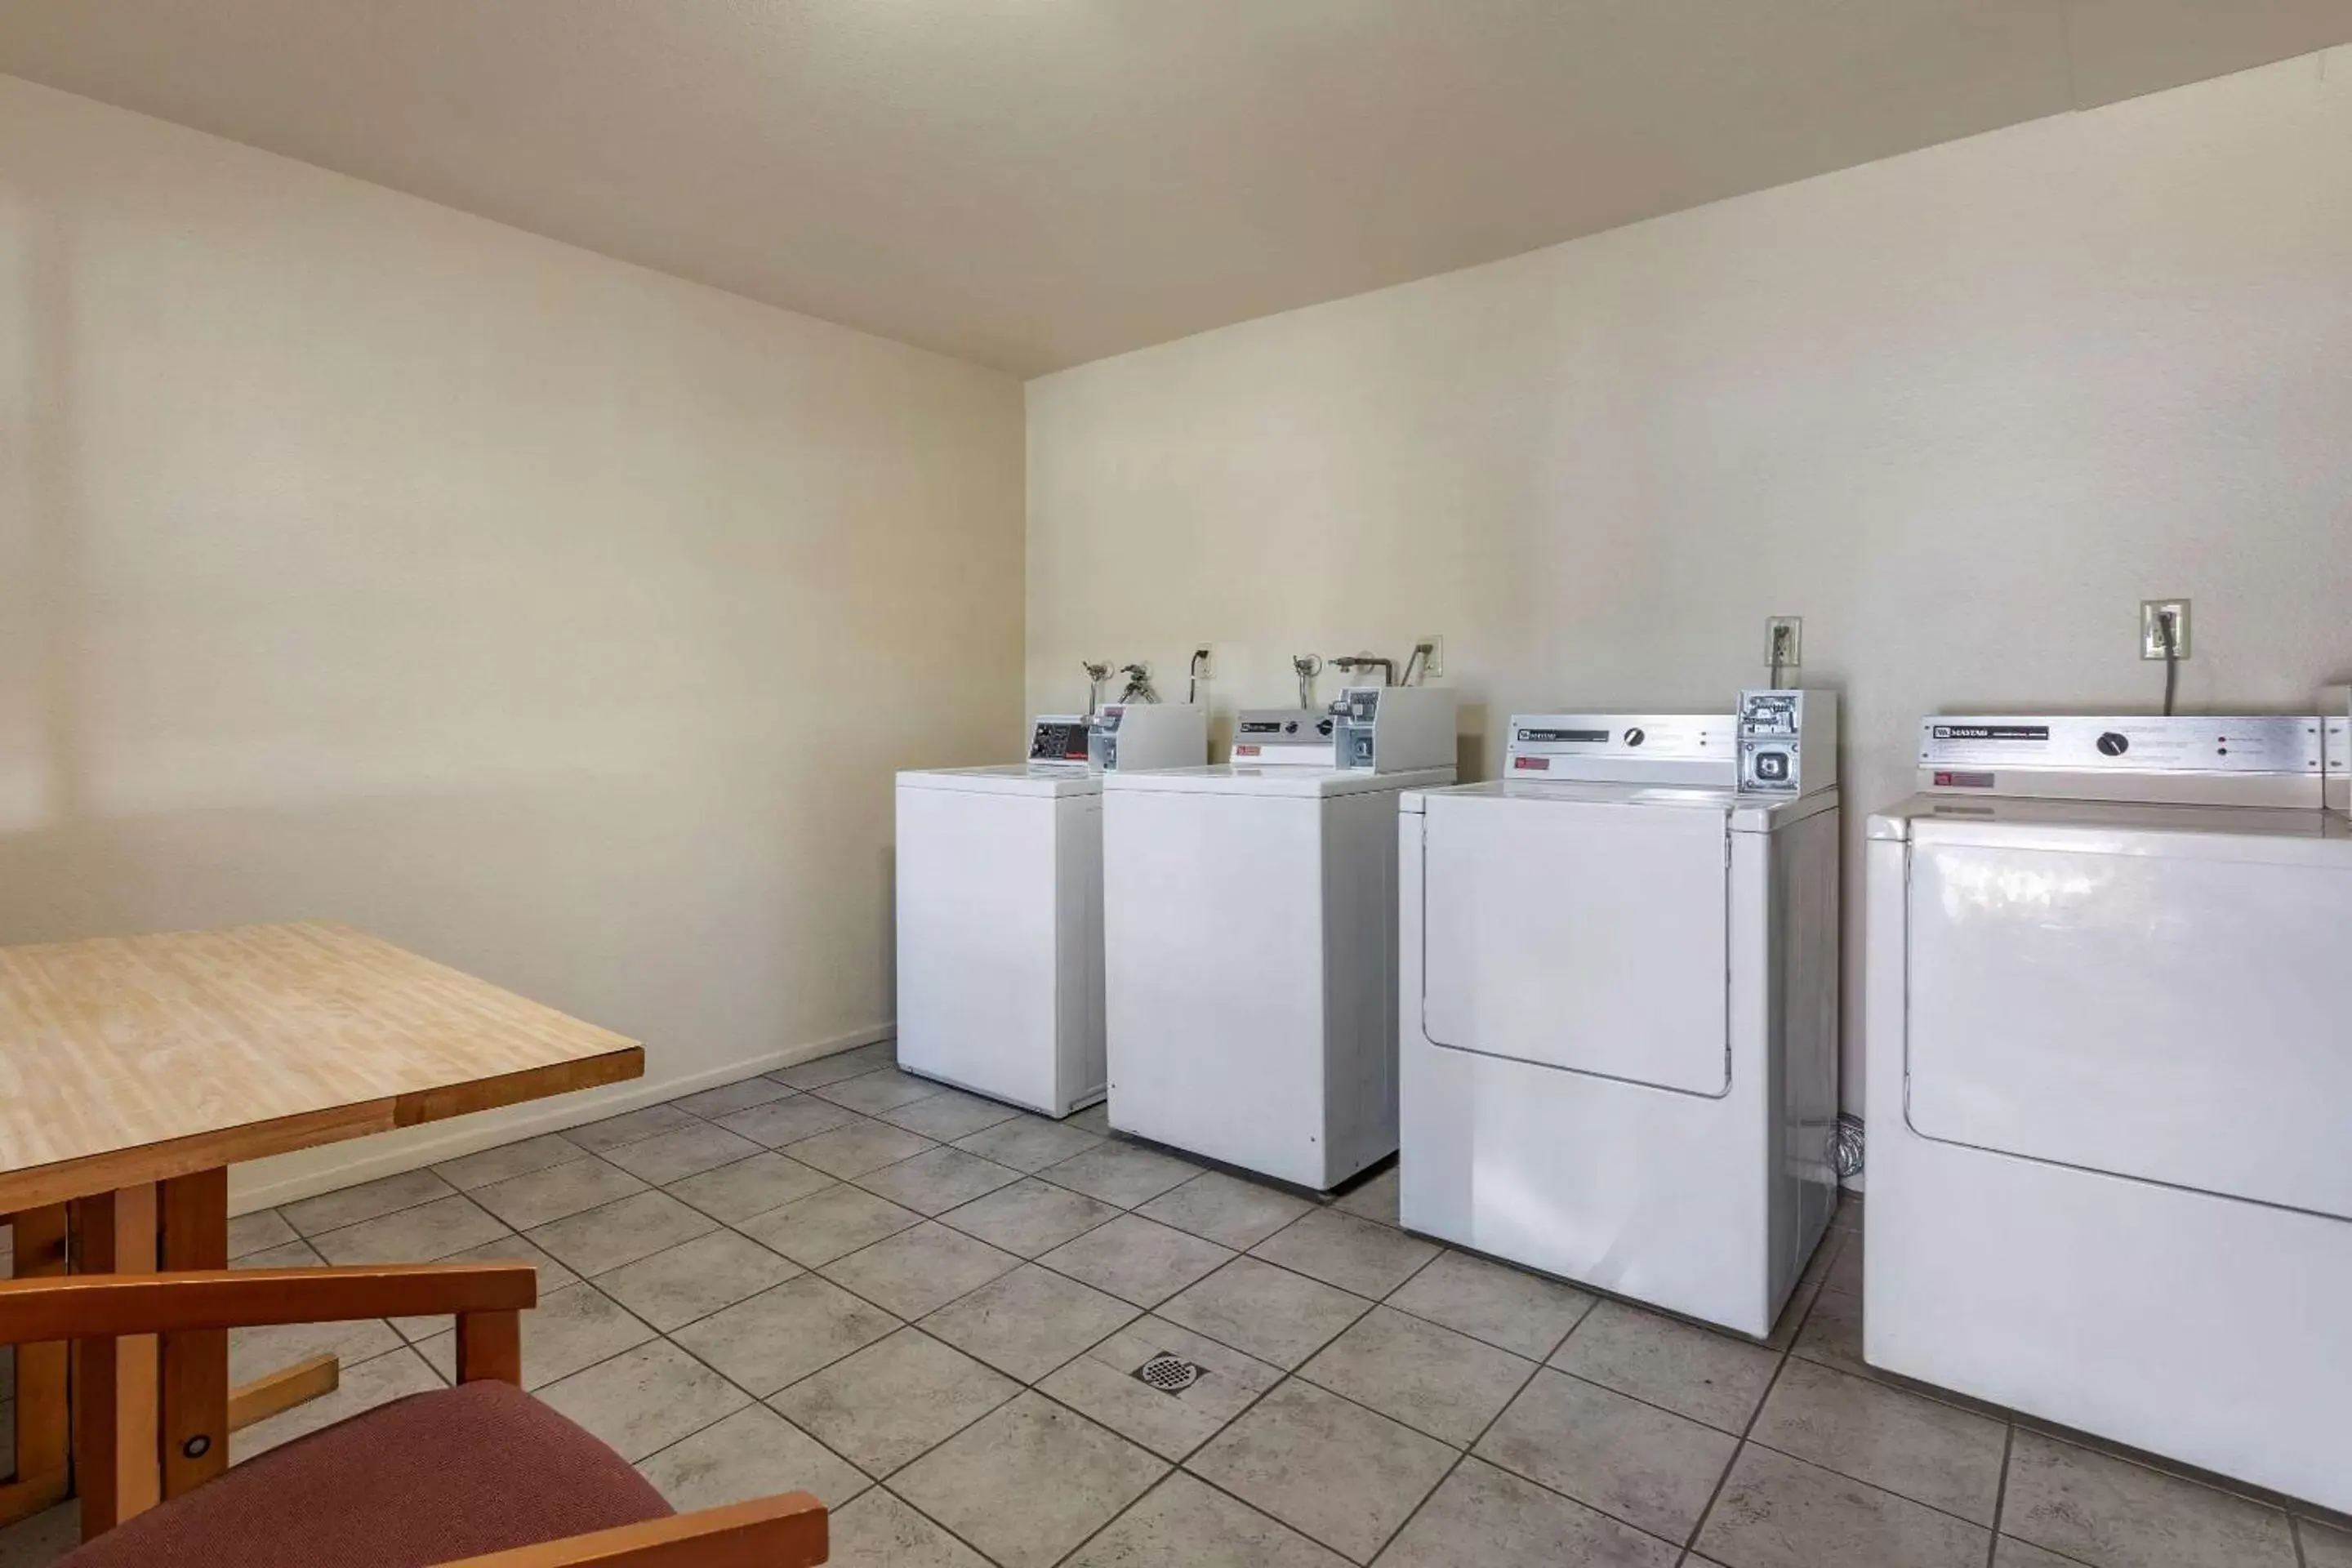 On site, Kitchen/Kitchenette in Comfort Inn Near Old Town Pasadena in Eagle Rock